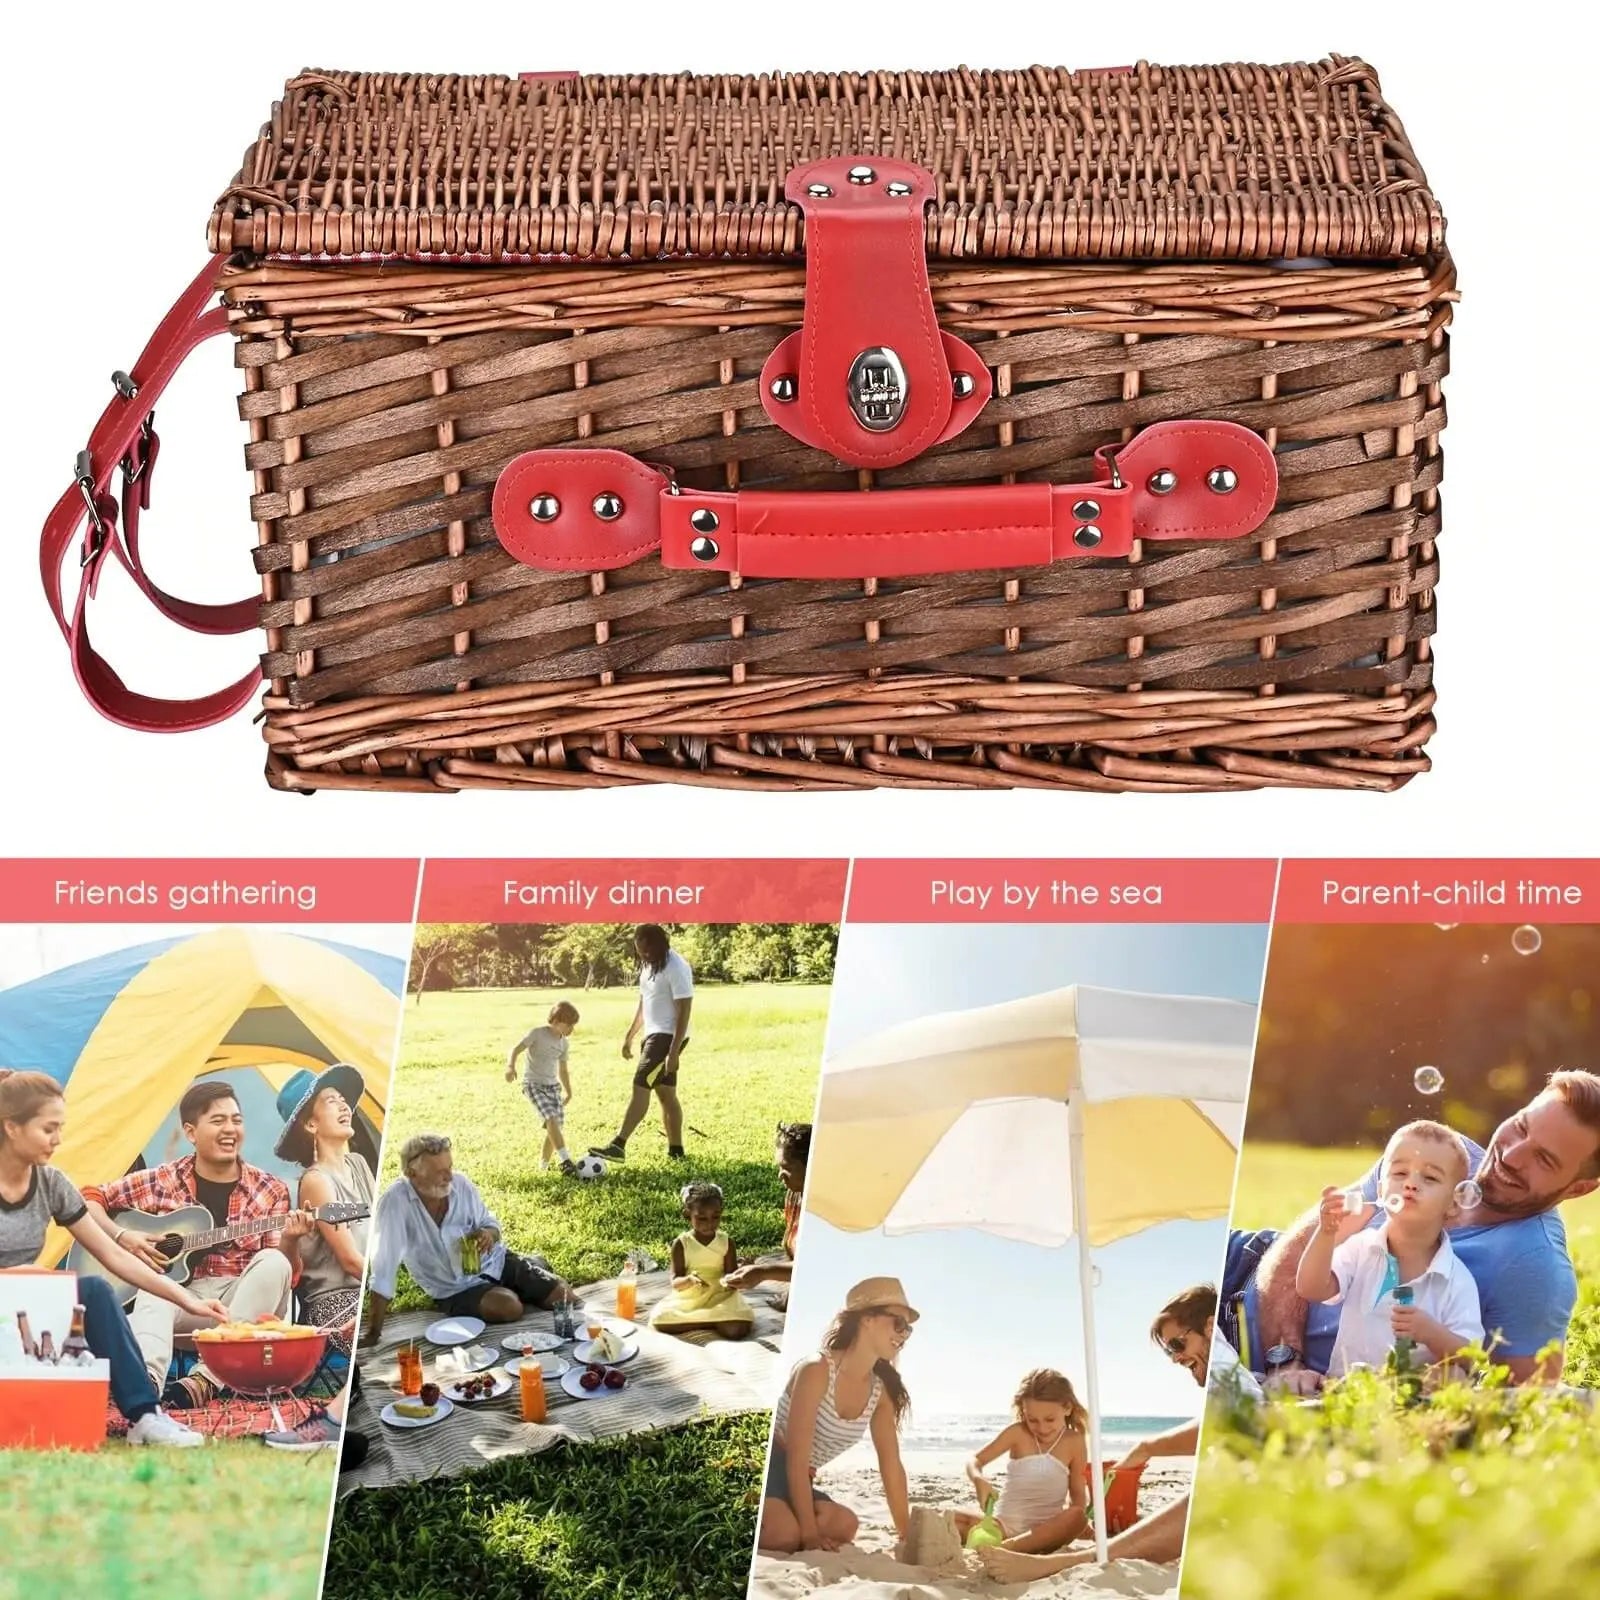 Waterproof picnic blanket included in the Hedgehog Decor picnic set, spread out on grass